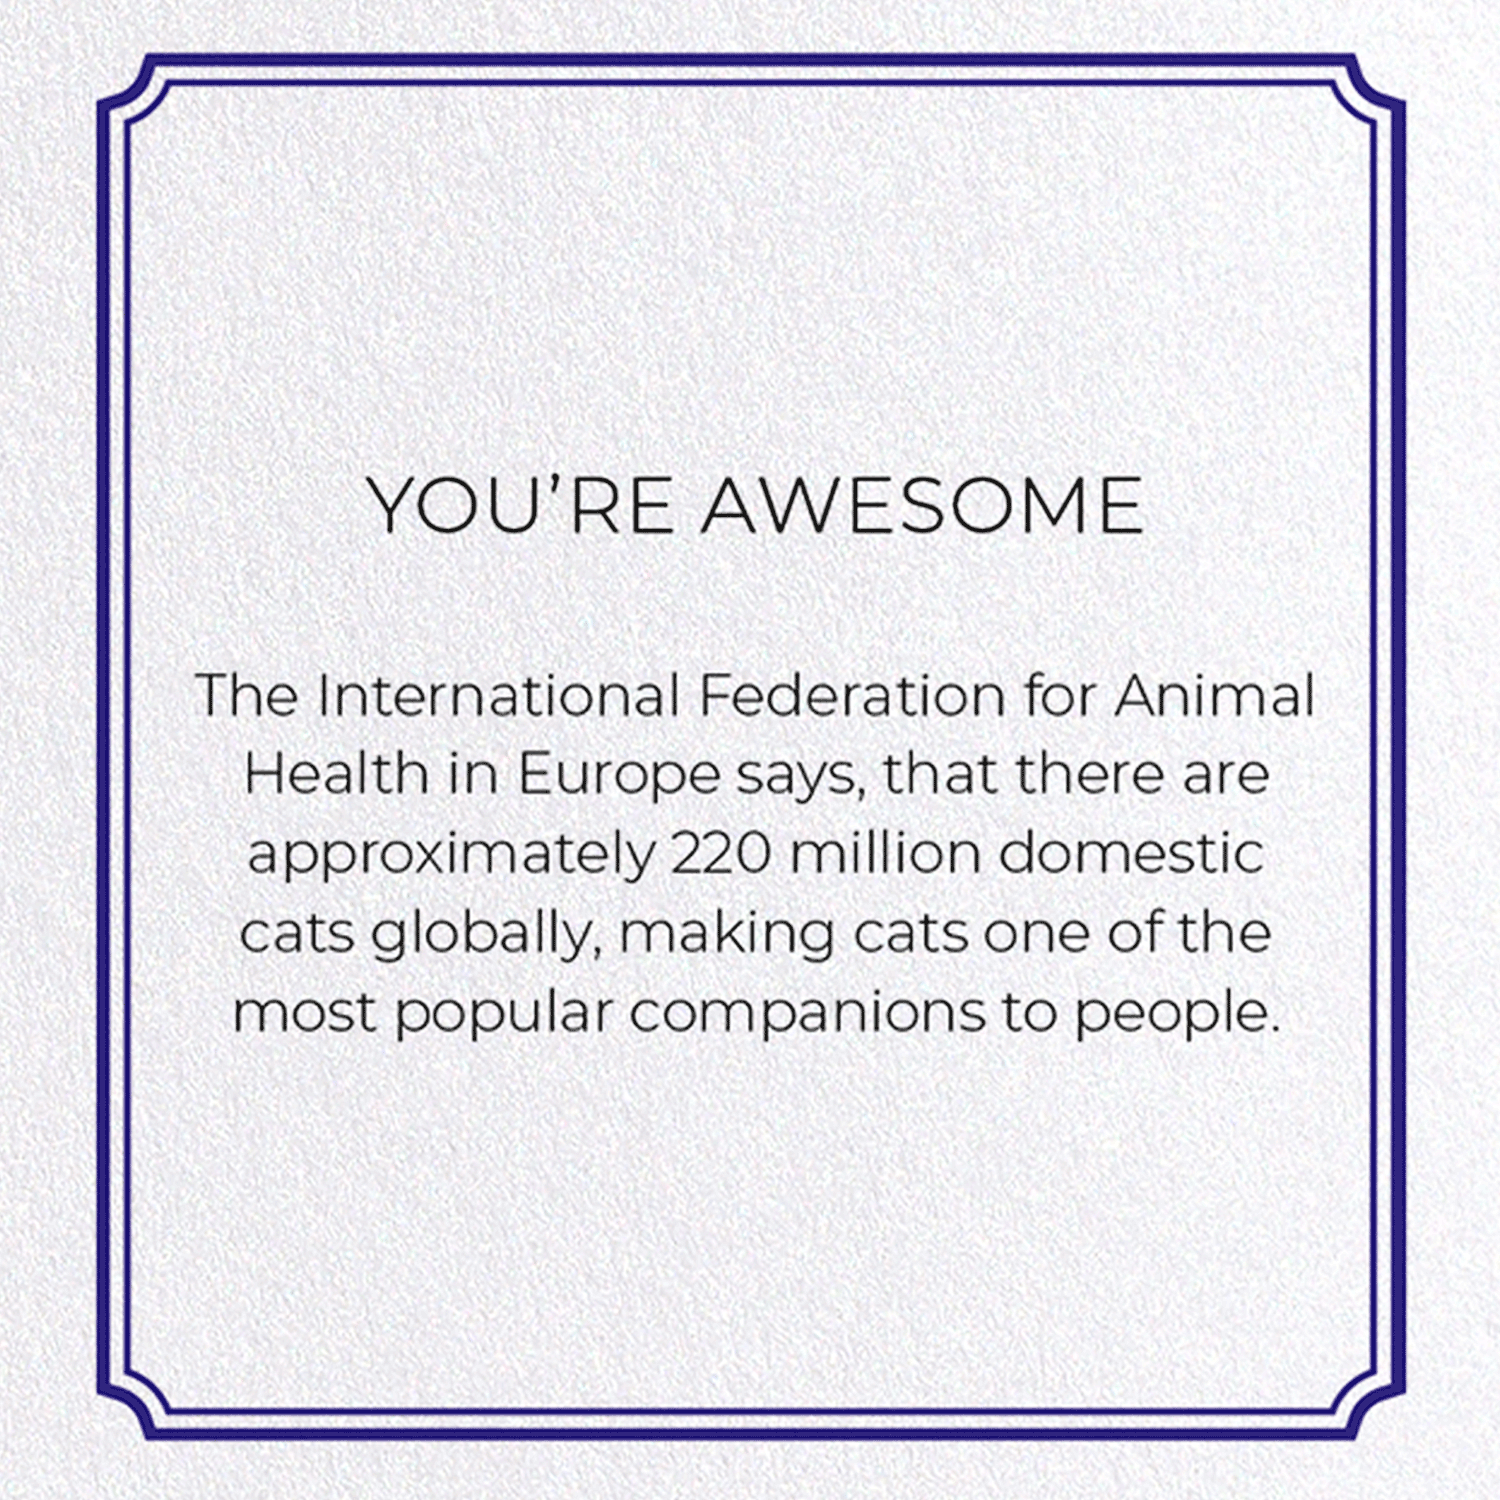 YOU'RE AWESOME: Vintage Greeting Card